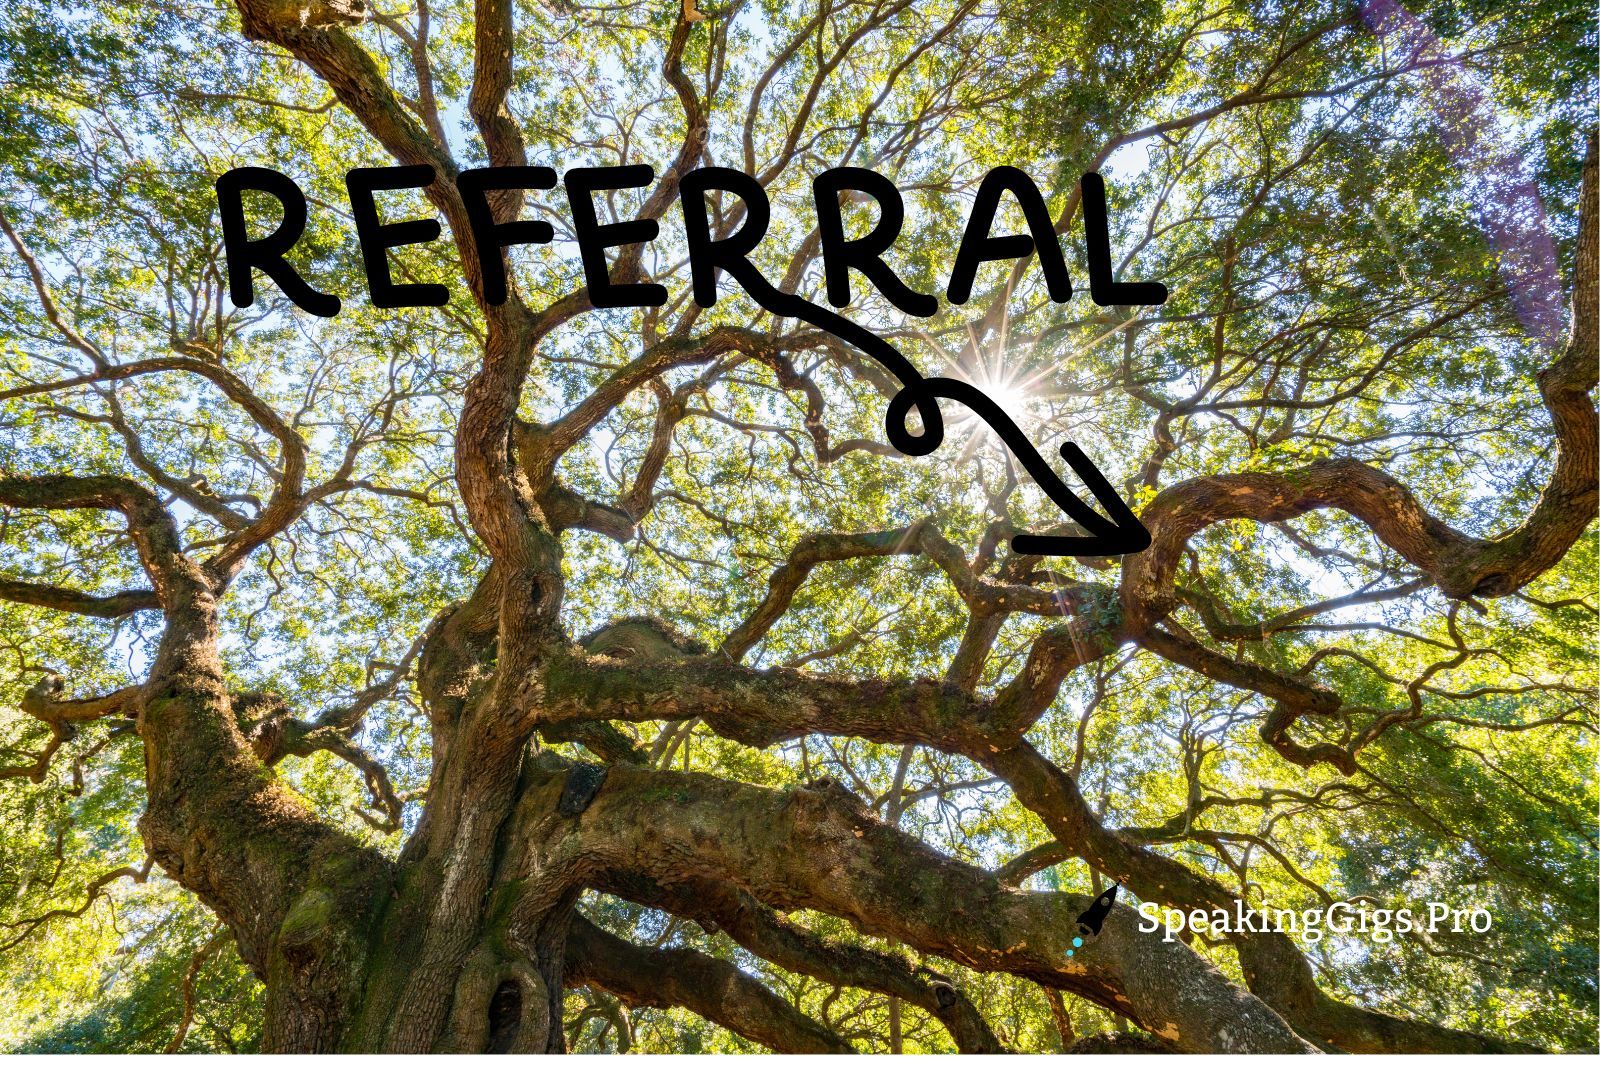 The Differences Between Stageside Leads and Referrals